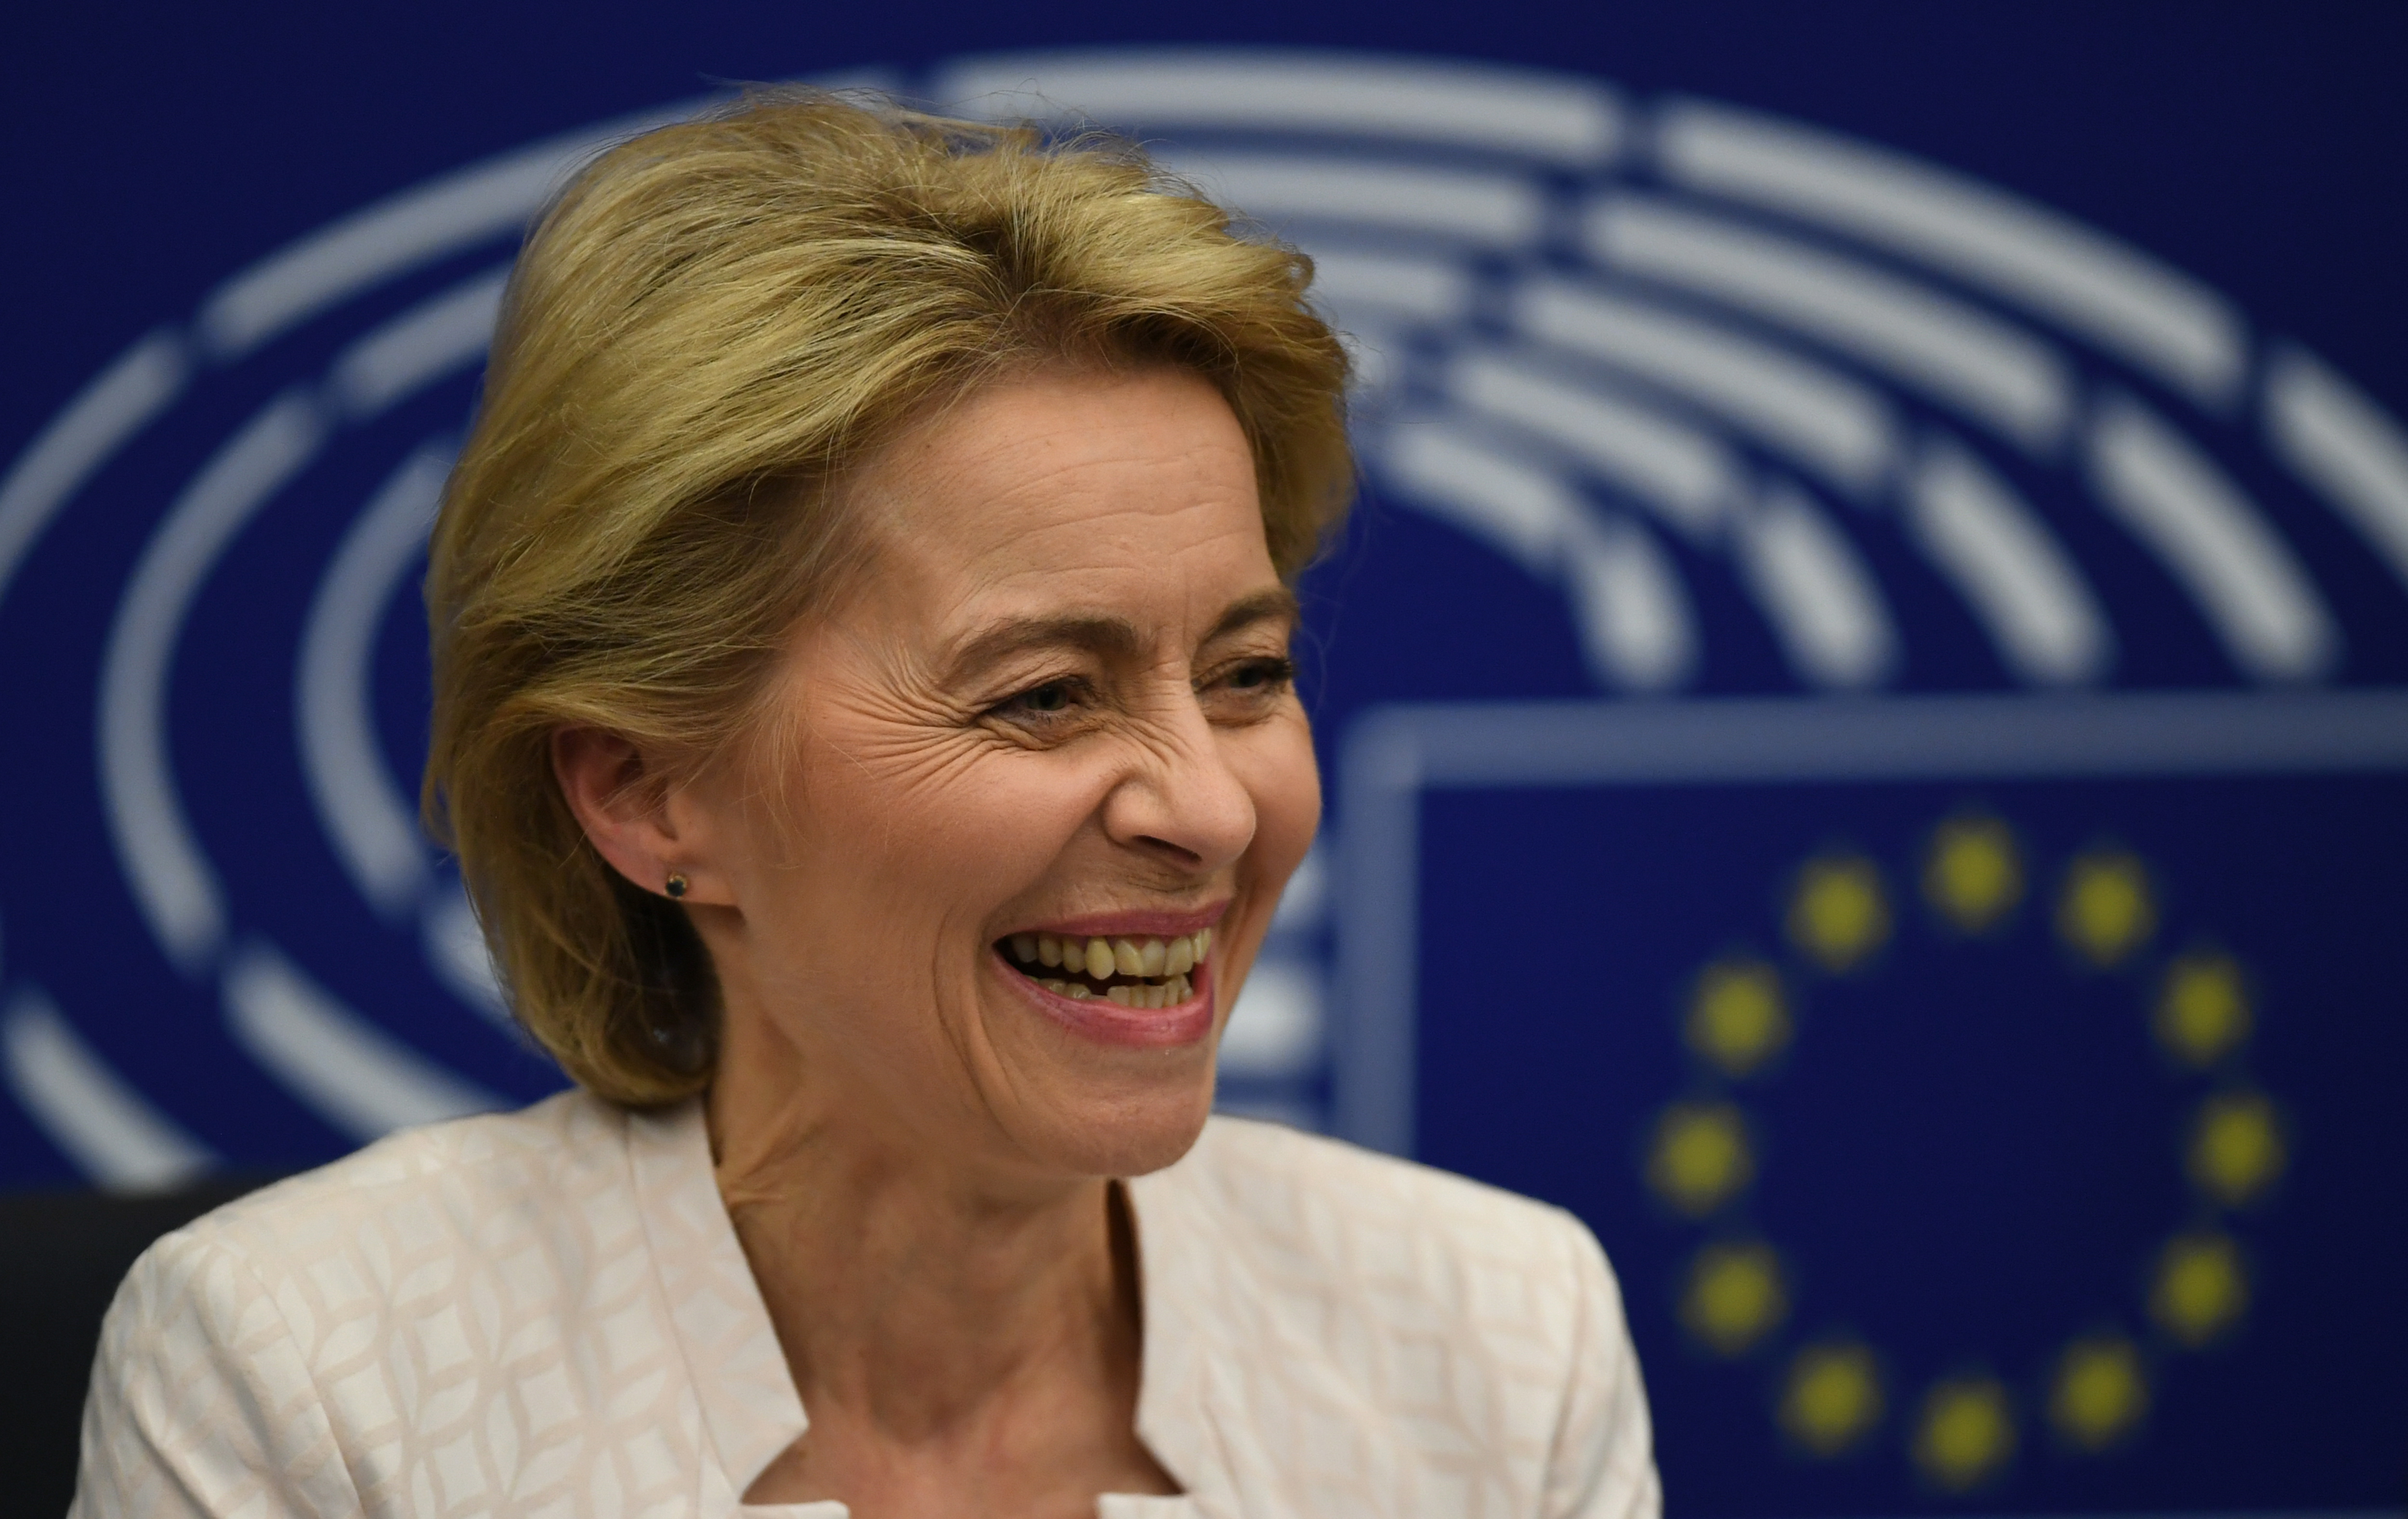 epa07720998 German Defense Minister Ursula von der Leyen and nominated President of the European Commission reacts after a vote at the European Parliament in Strasbourg, France, 16 July 2019. European Parliament voted in favor of Ursula von der Leyen as the new President of the European Commission.  EPA/PATRICK SEEGER